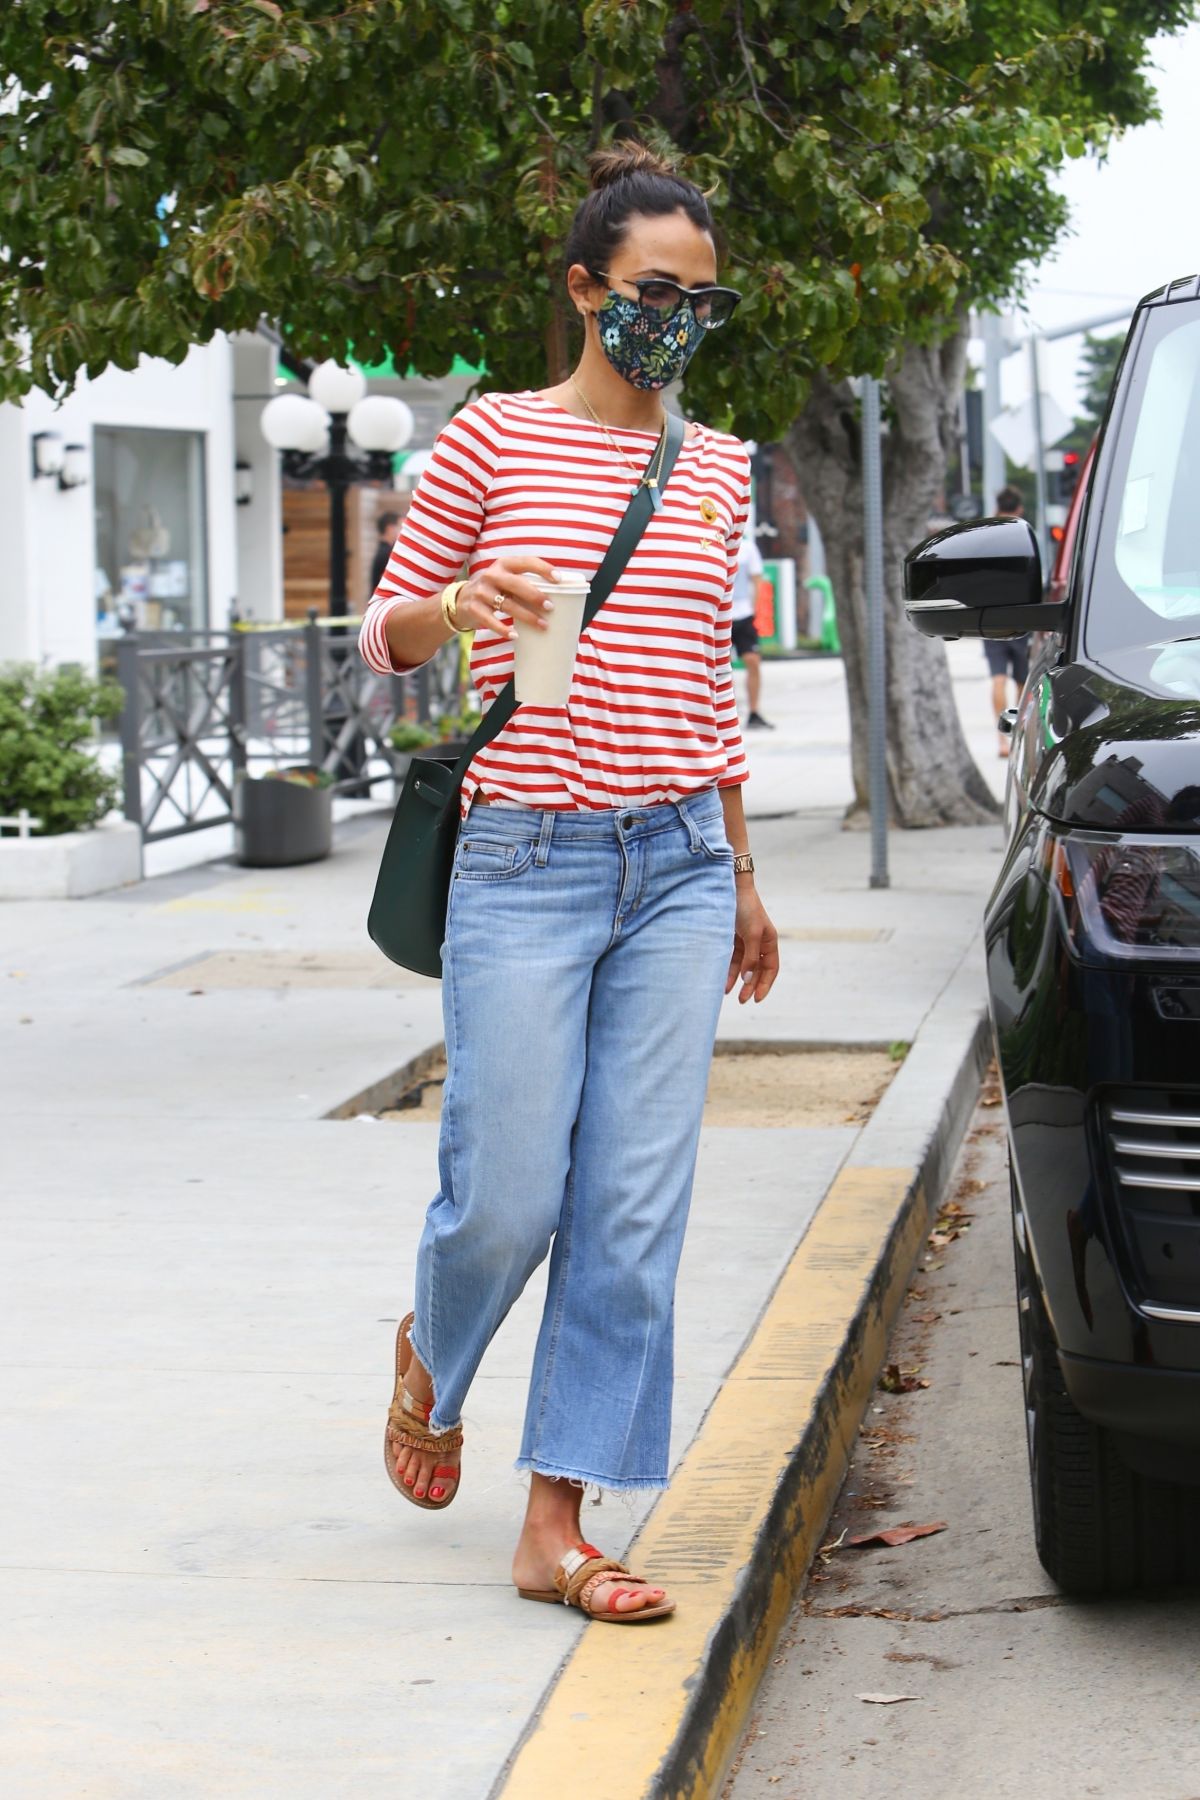 JORDANA BREWSTER Out with Her Dog in Brentwood 06/25/2020 – HawtCelebs